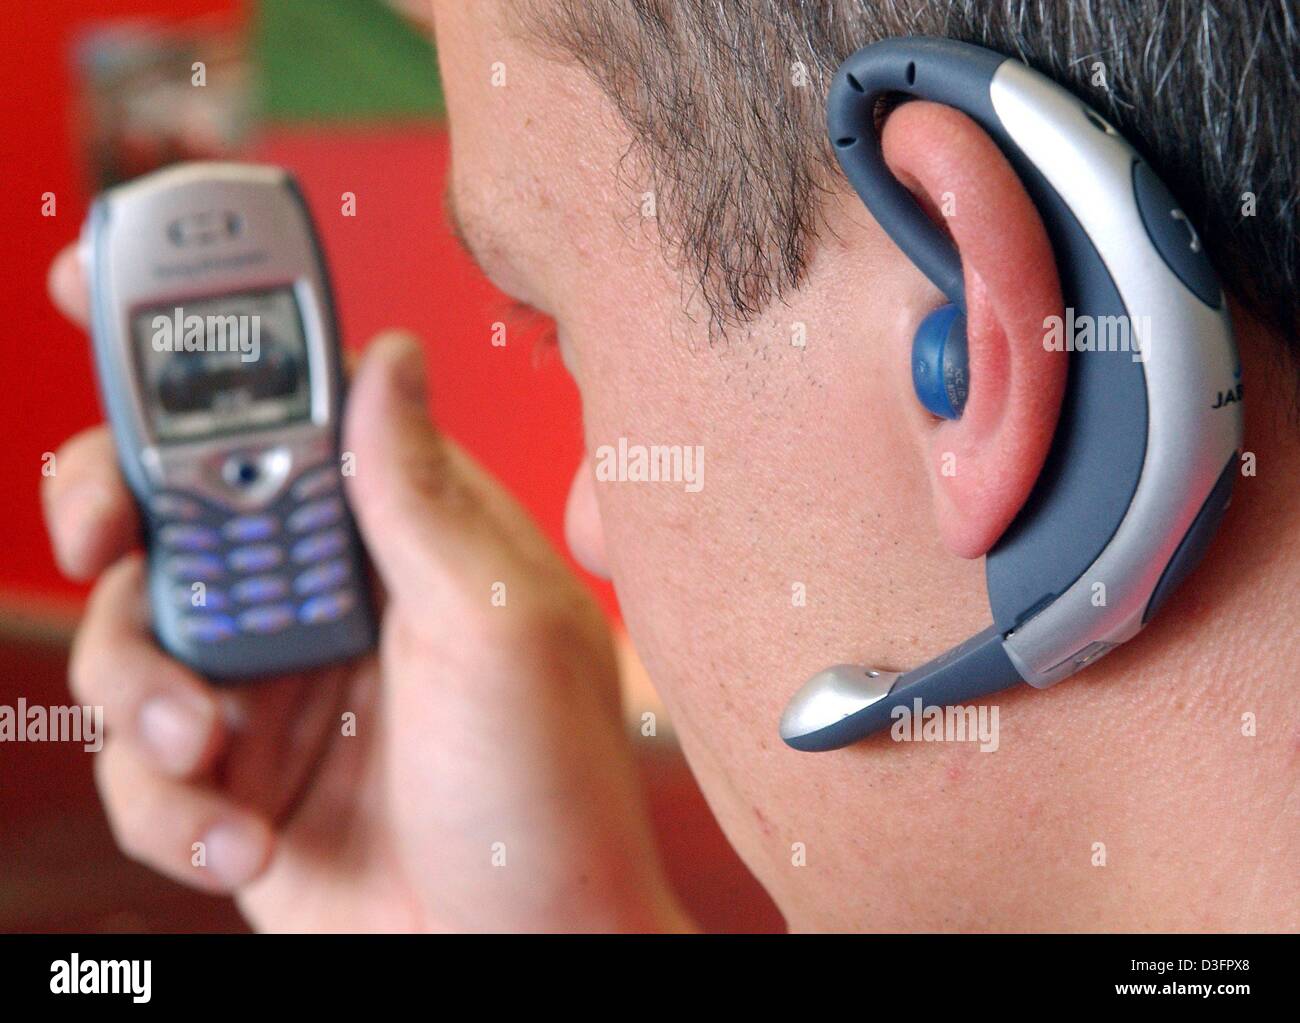 overschreden gebaar handtekening dpa) - A user wears a Bluetooth earplug Jabra BT-200 which can be used for  hands-free phoning with a mobile phone, in Leipzig, Germany, 6 April 2003.  The Bluetooth wireless connection works